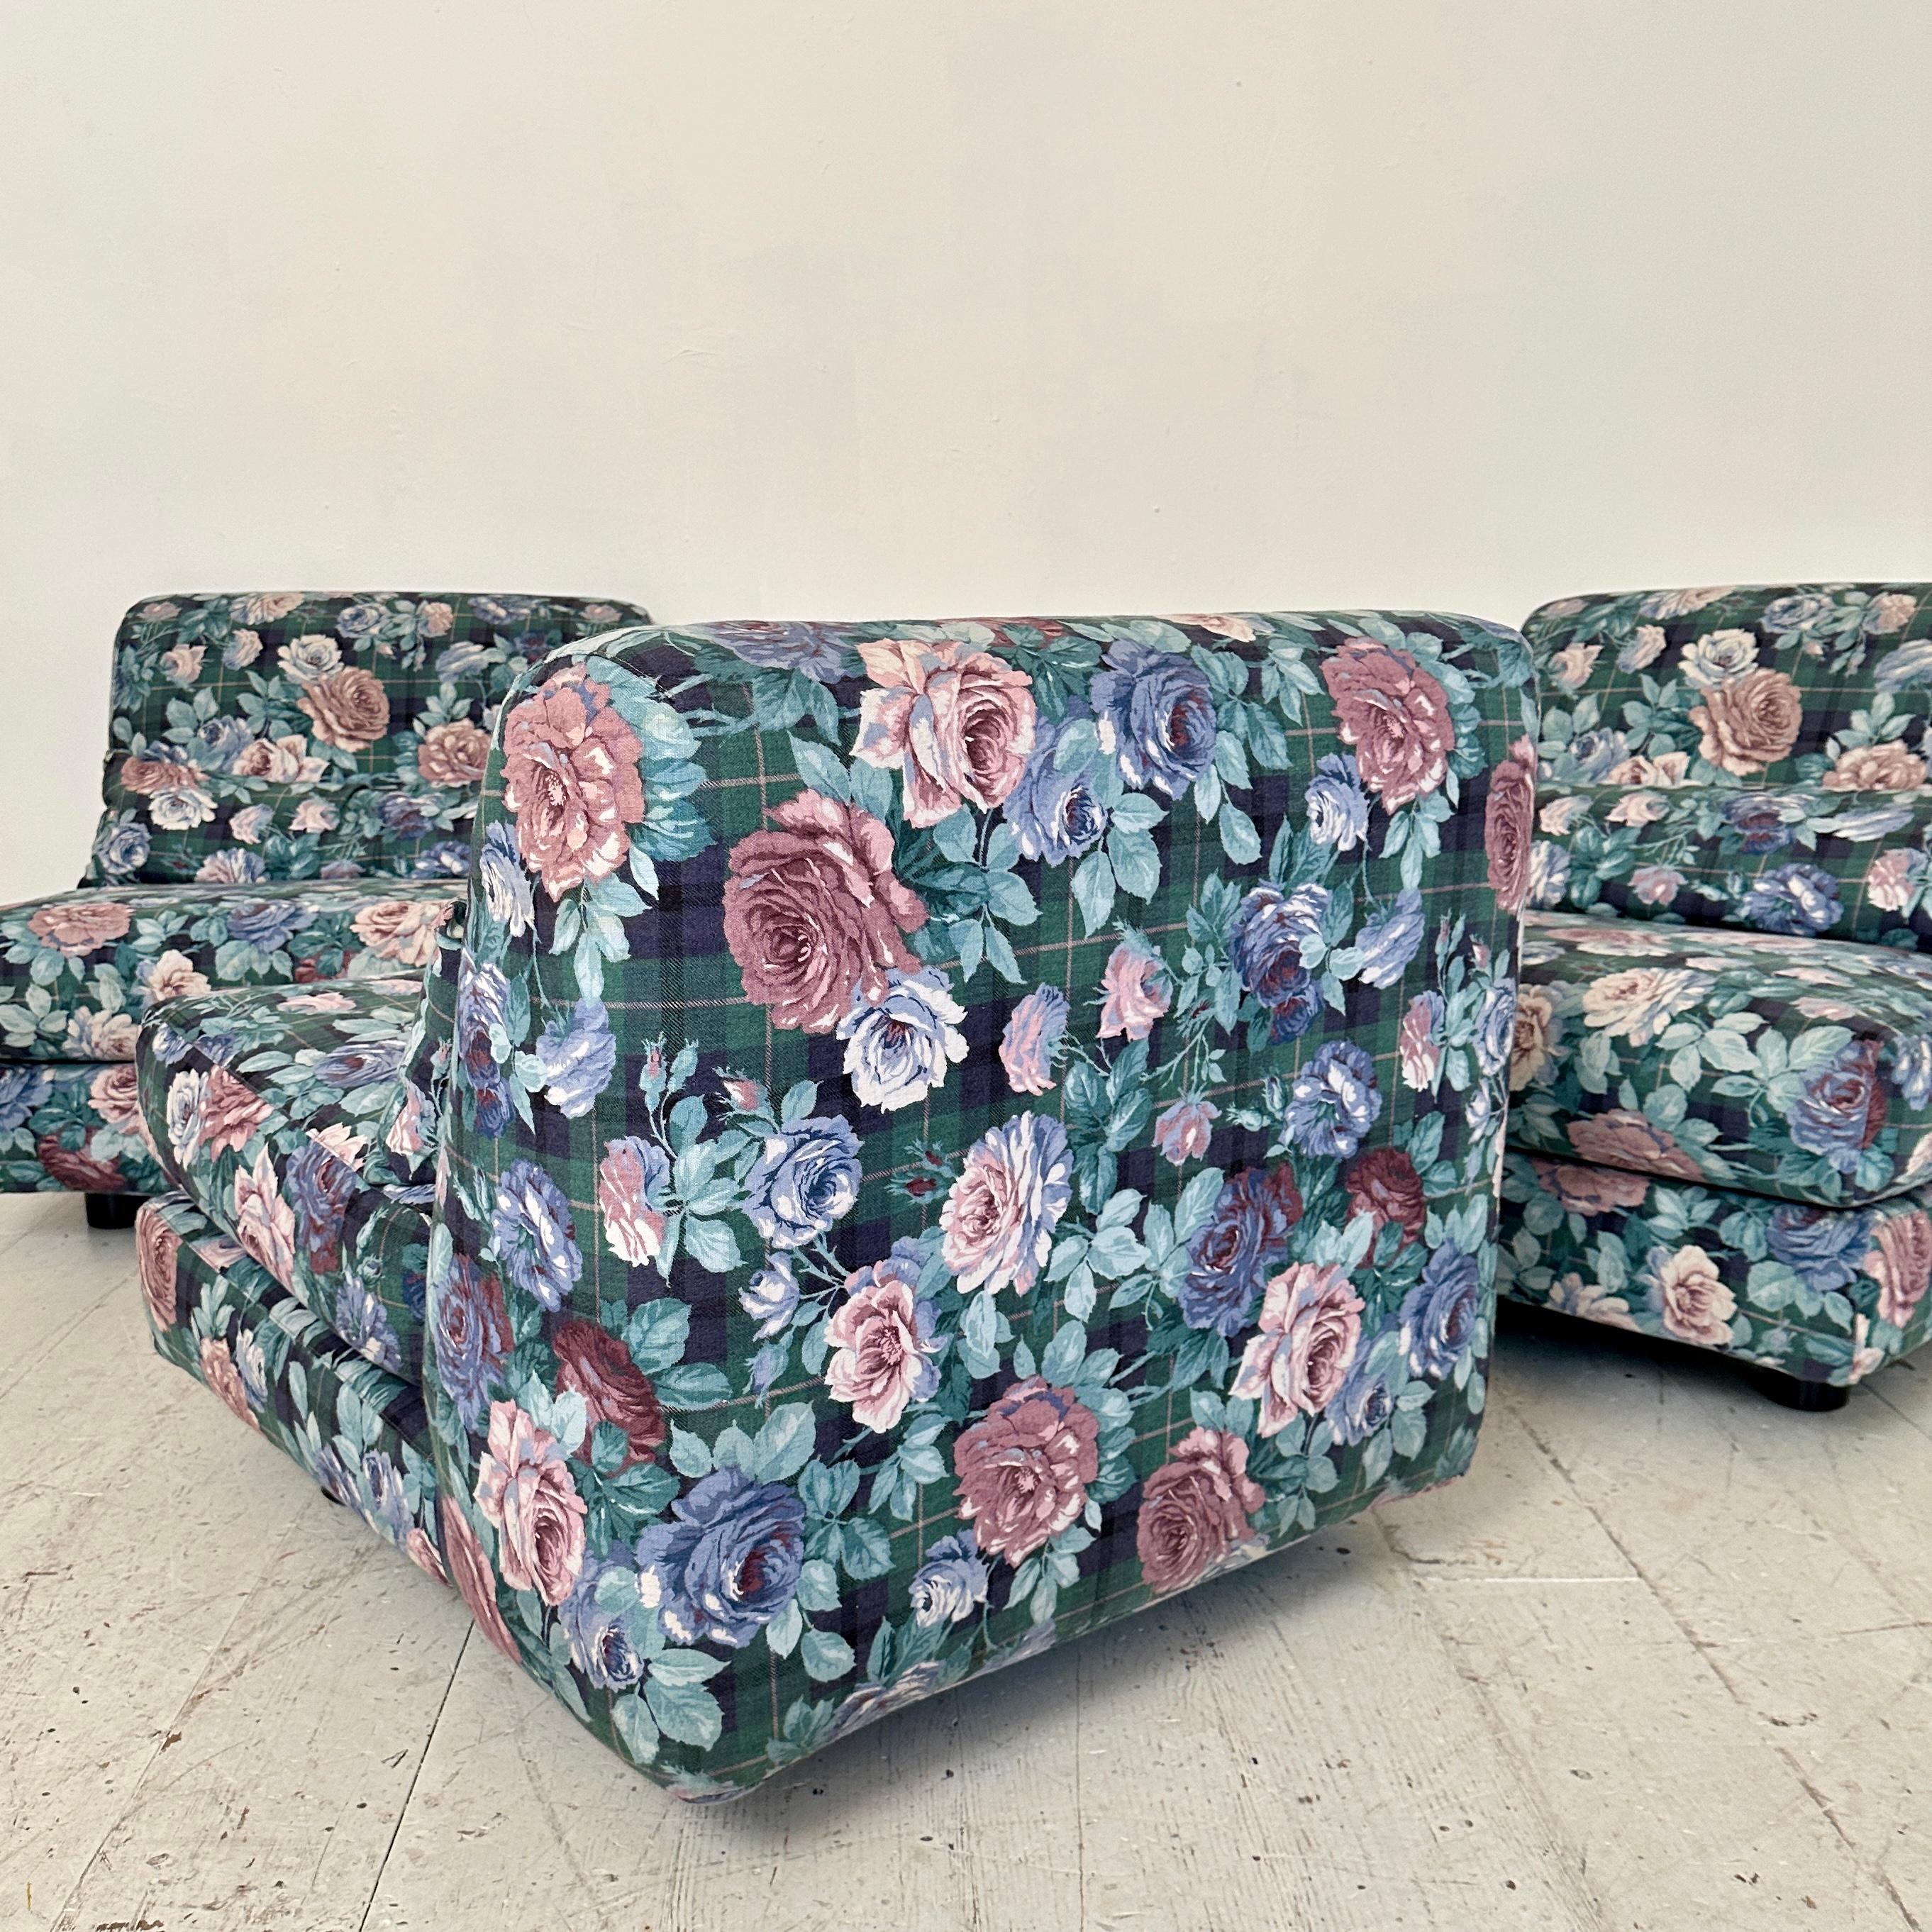 Mid Century Italian Modular Sofa in 3 Pieces with a Flower Fabric, around 1970 For Sale 4